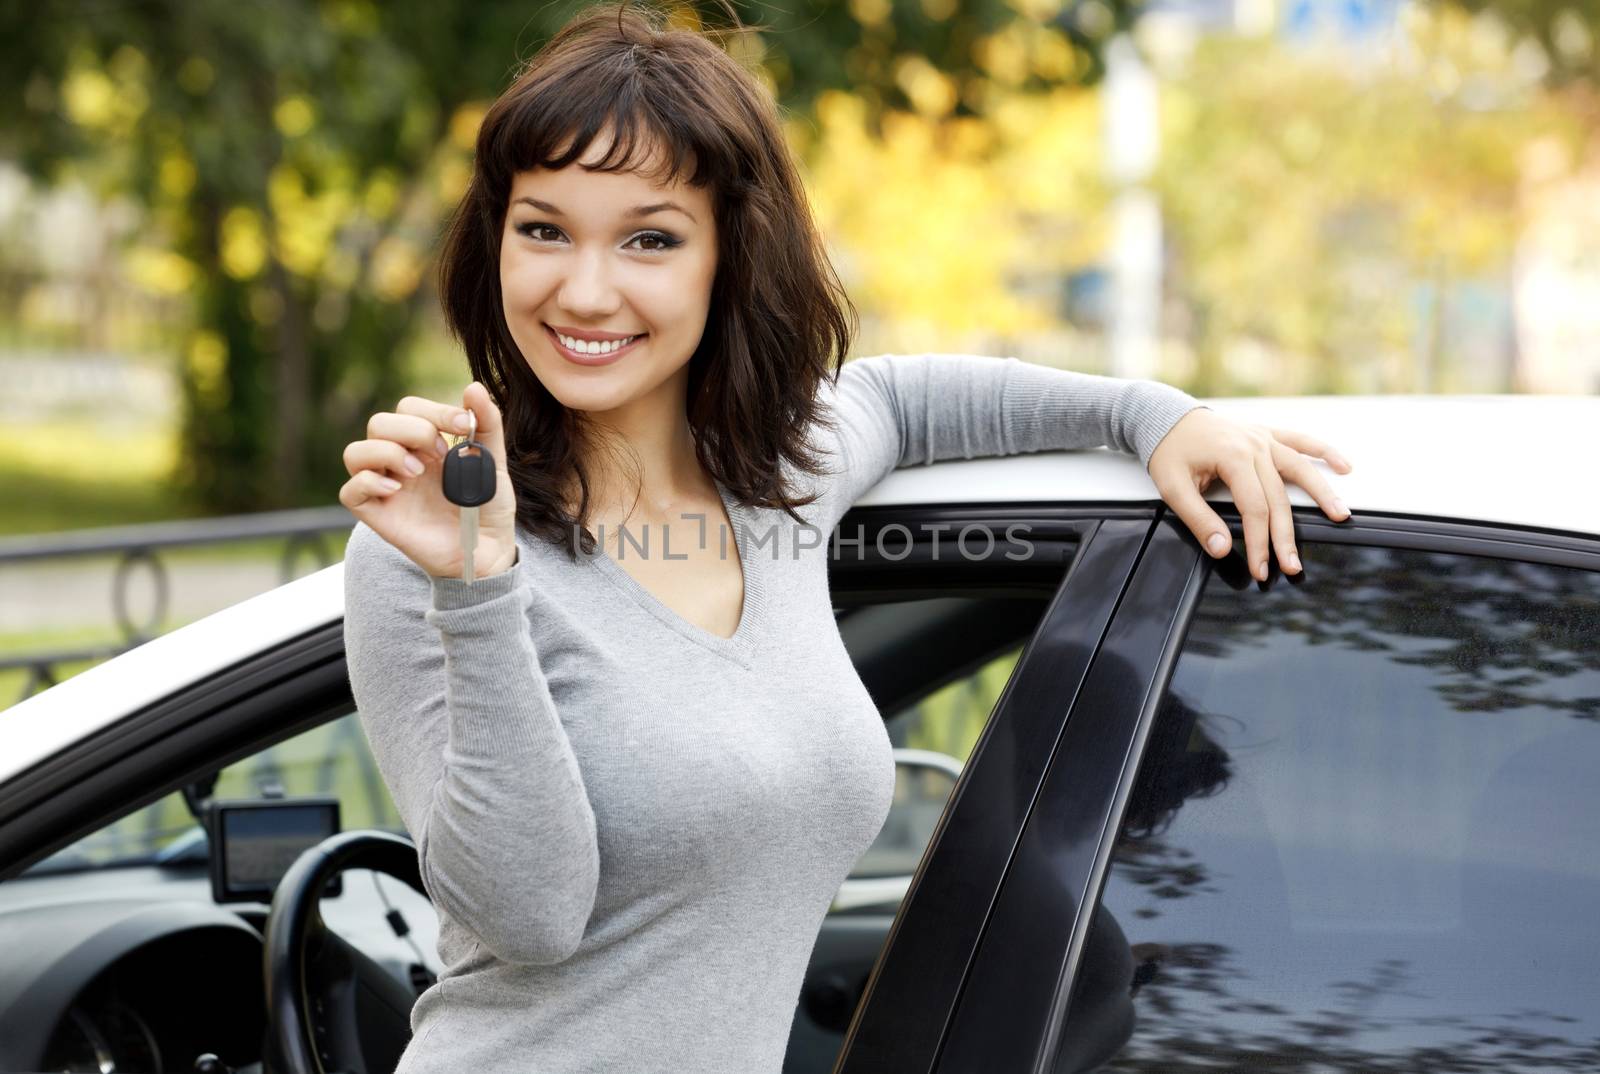 Pretty girl in a car showing the key.